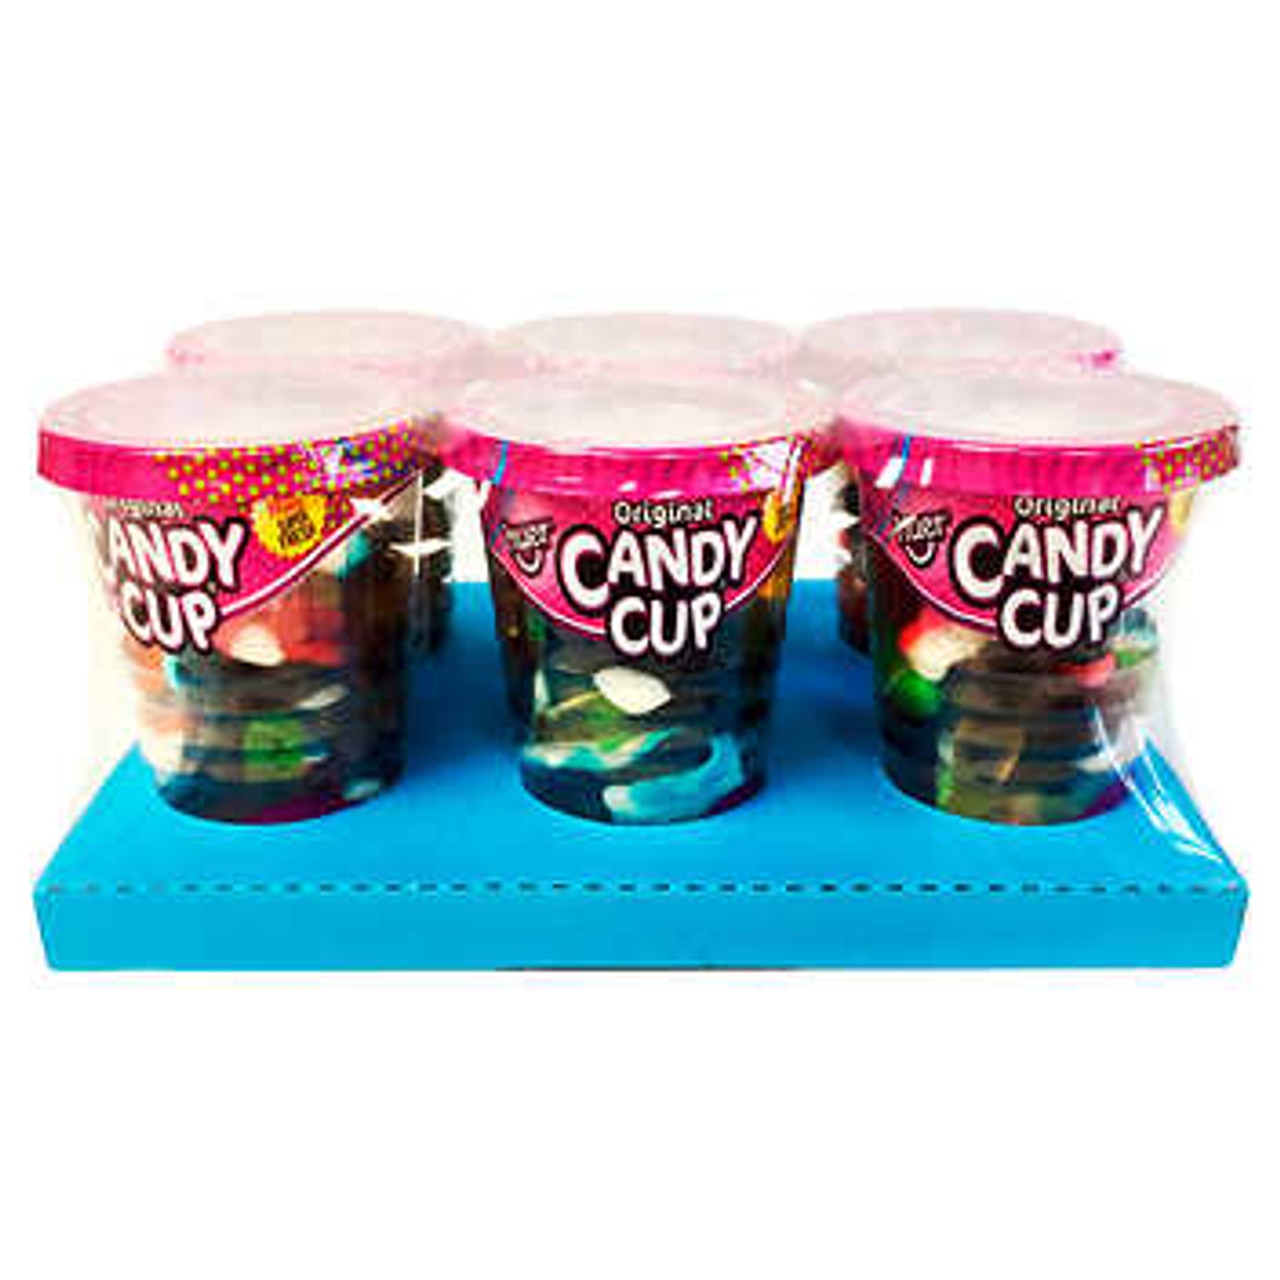 Huer Candy Cup Gummies 6 × 165 g (5.8 oz.) - Assorted Gummy Candy Delights in Convenient Cups- Chicken Pieces